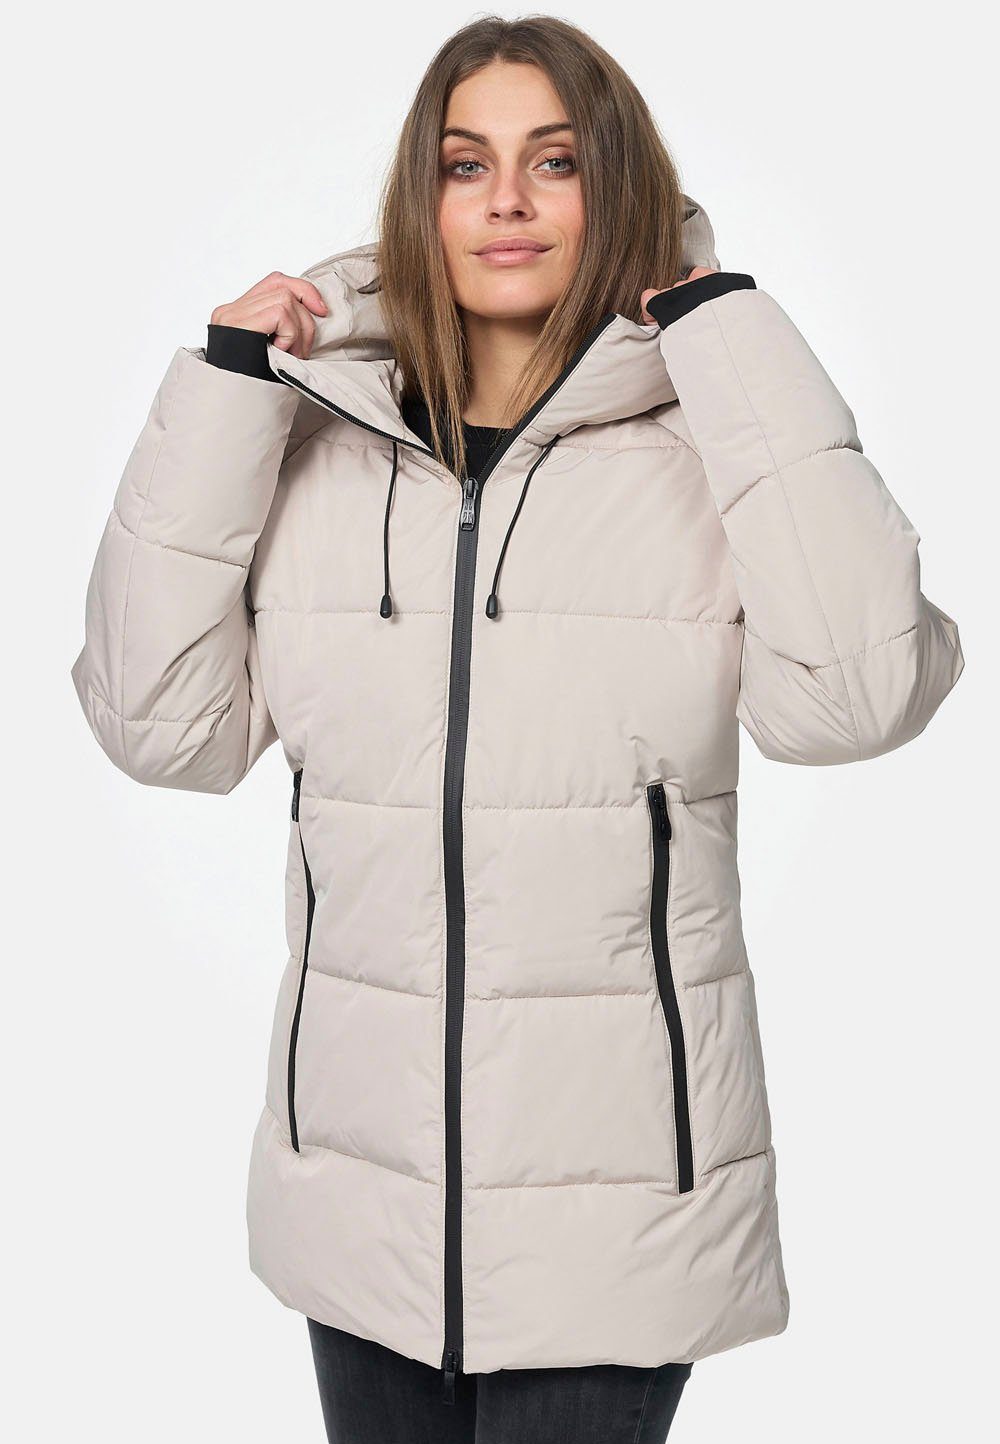 SALLY Sand Outdoorjacke Lonsdale